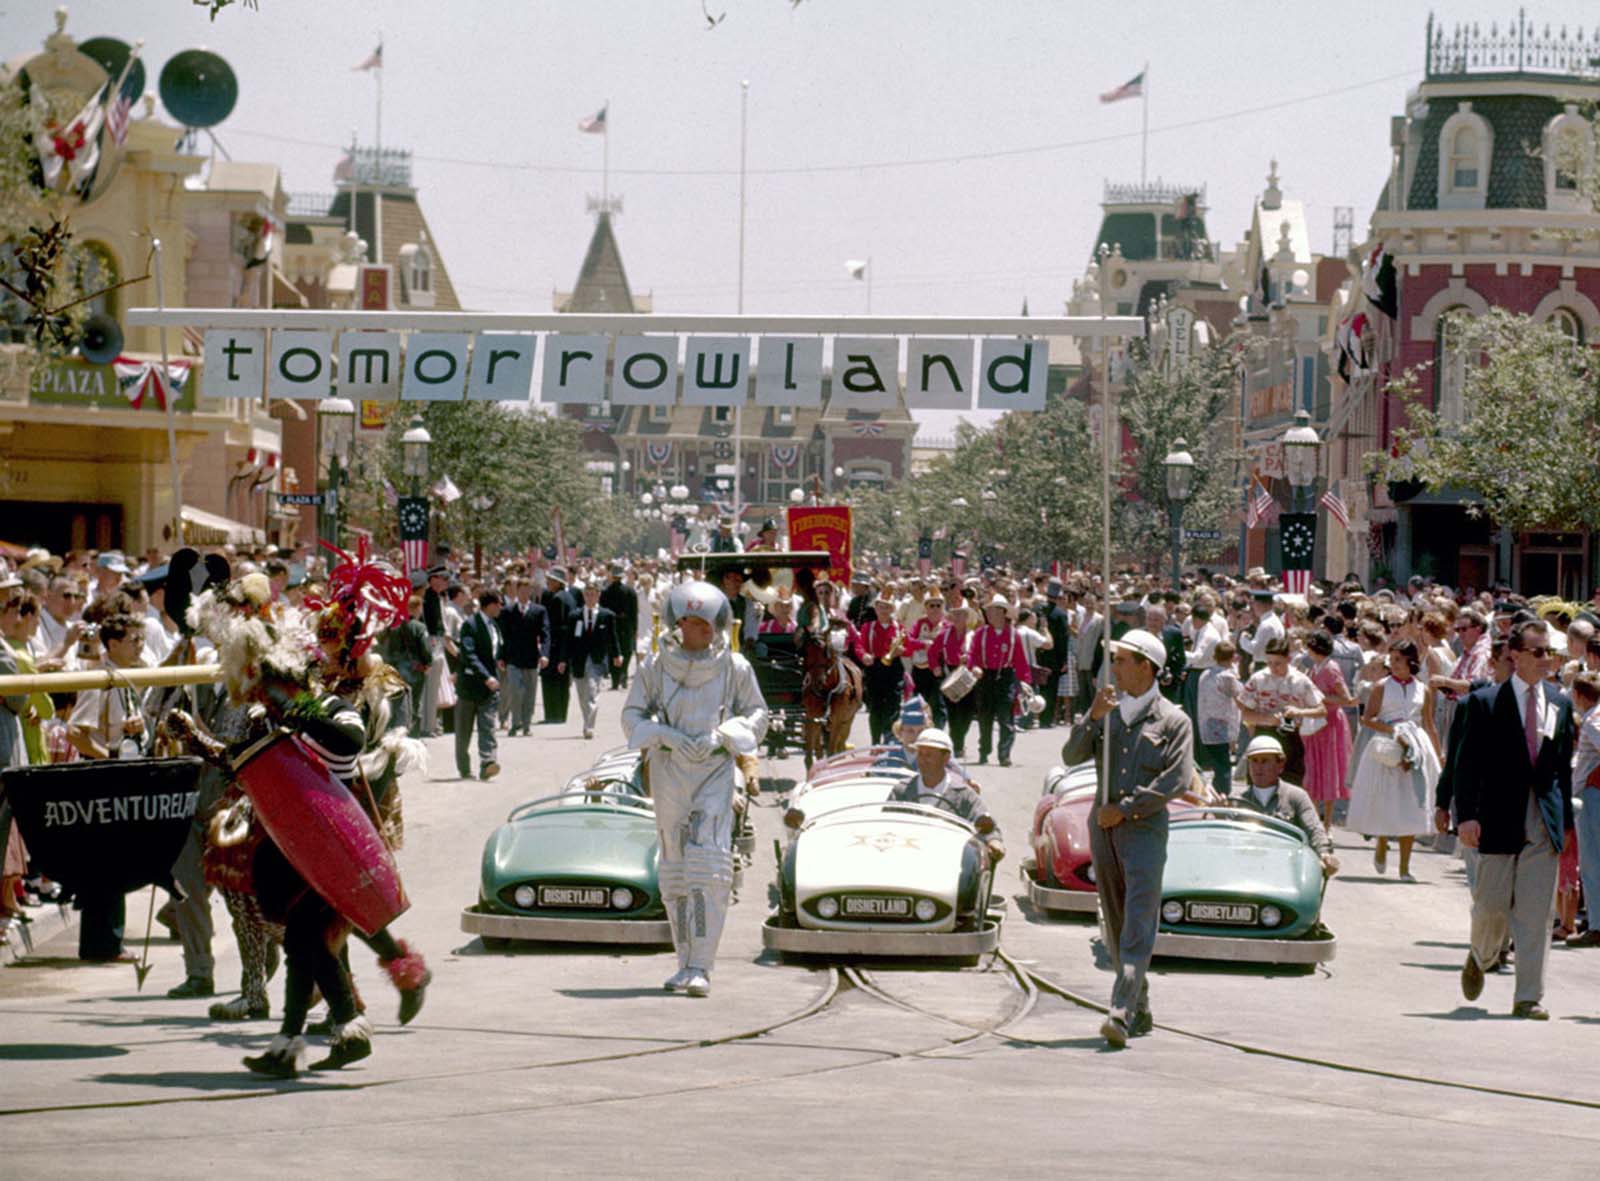 Crowds of people watch the Tomorrowland portion of a parade celebrating the opening of the Disneyland amusement park on July 17, 1955.